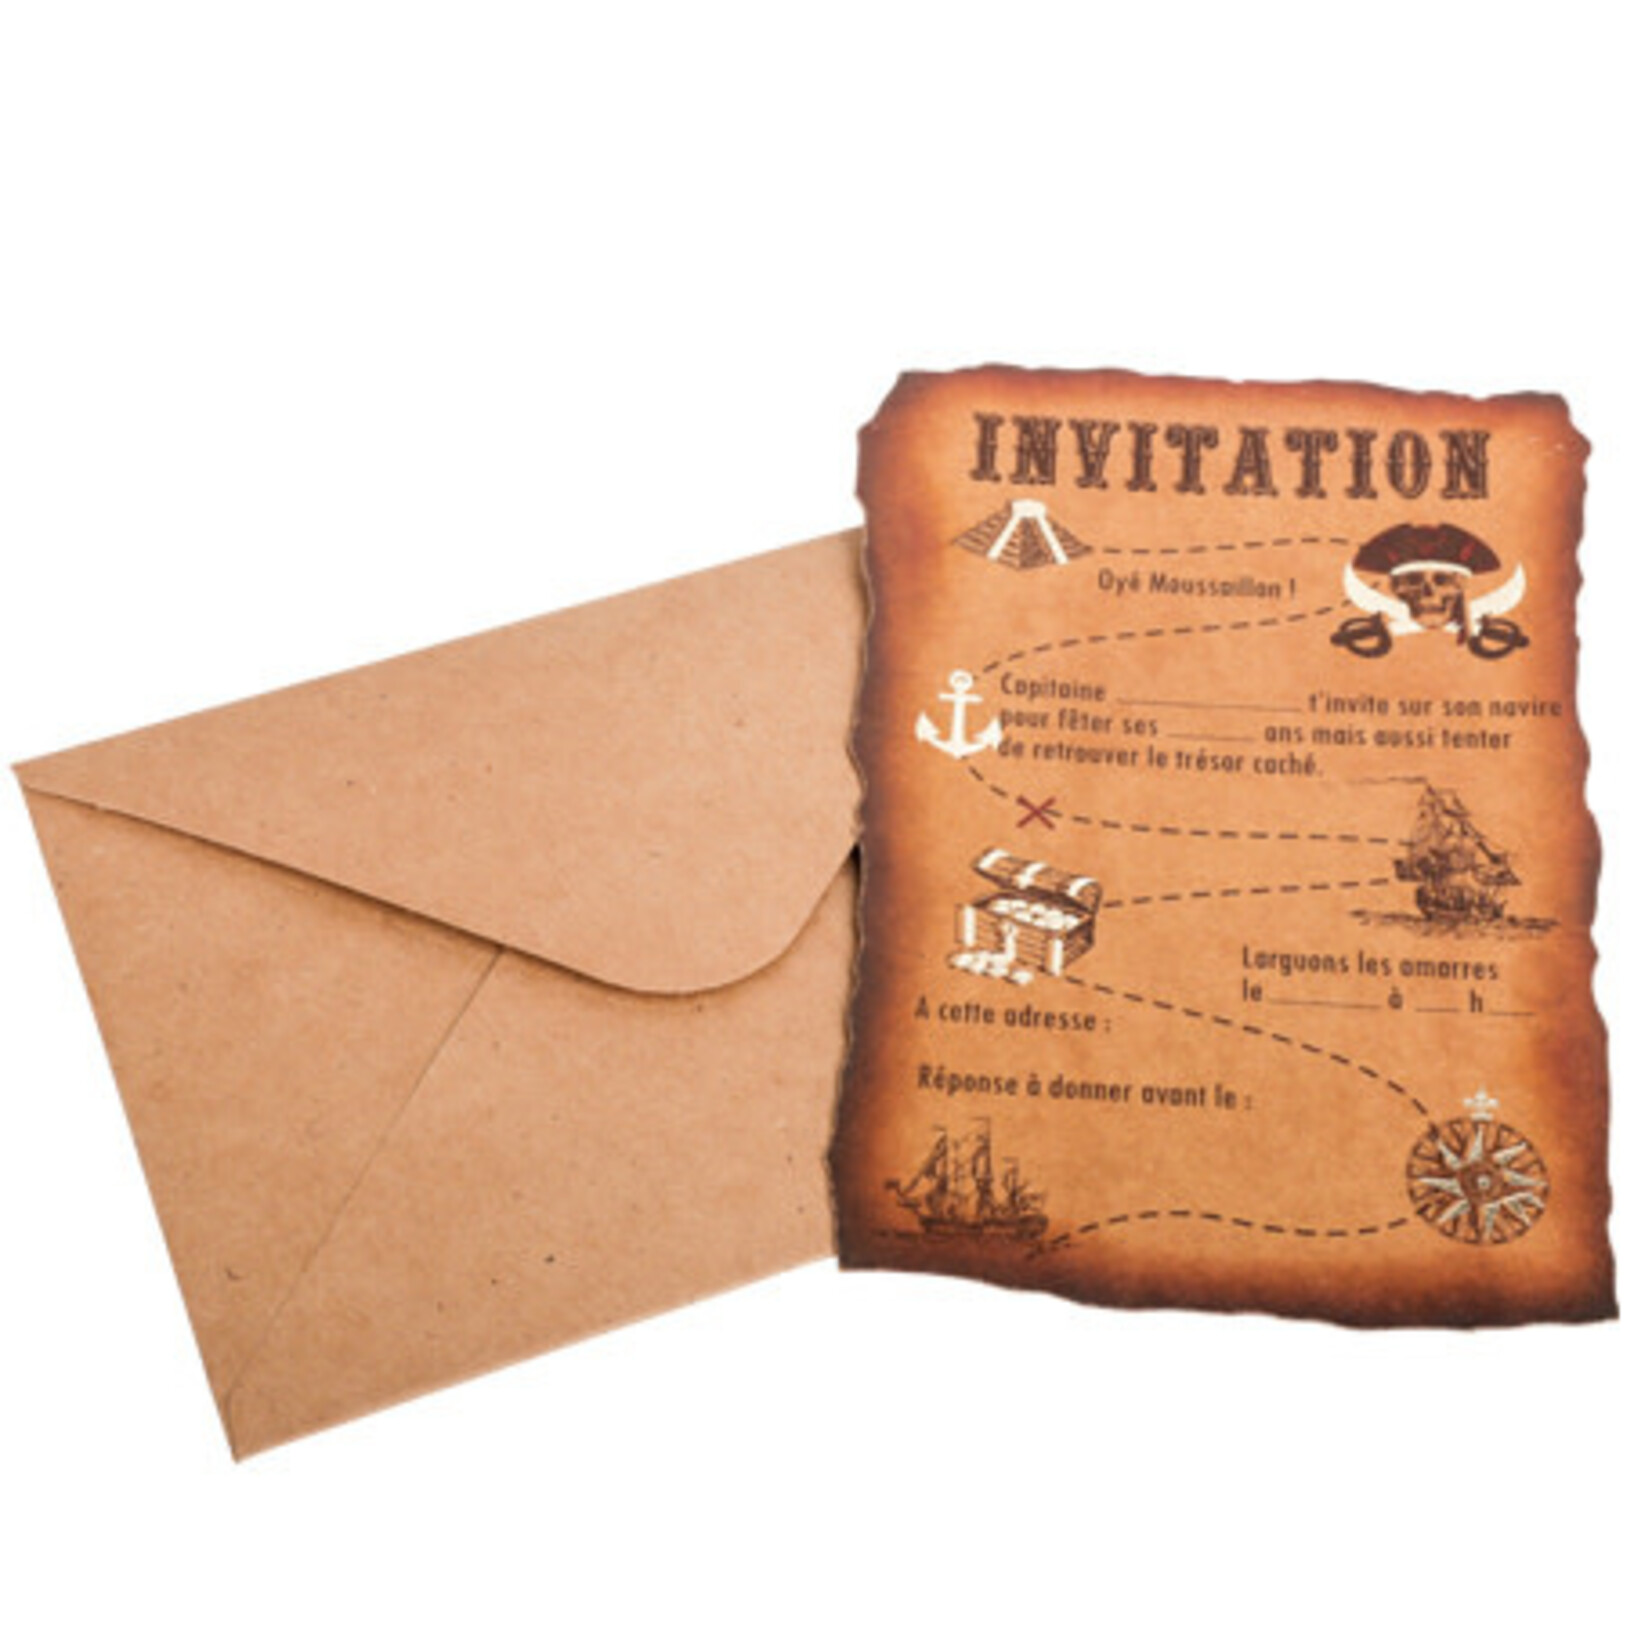 AF pirate invitations with envelope 8 x